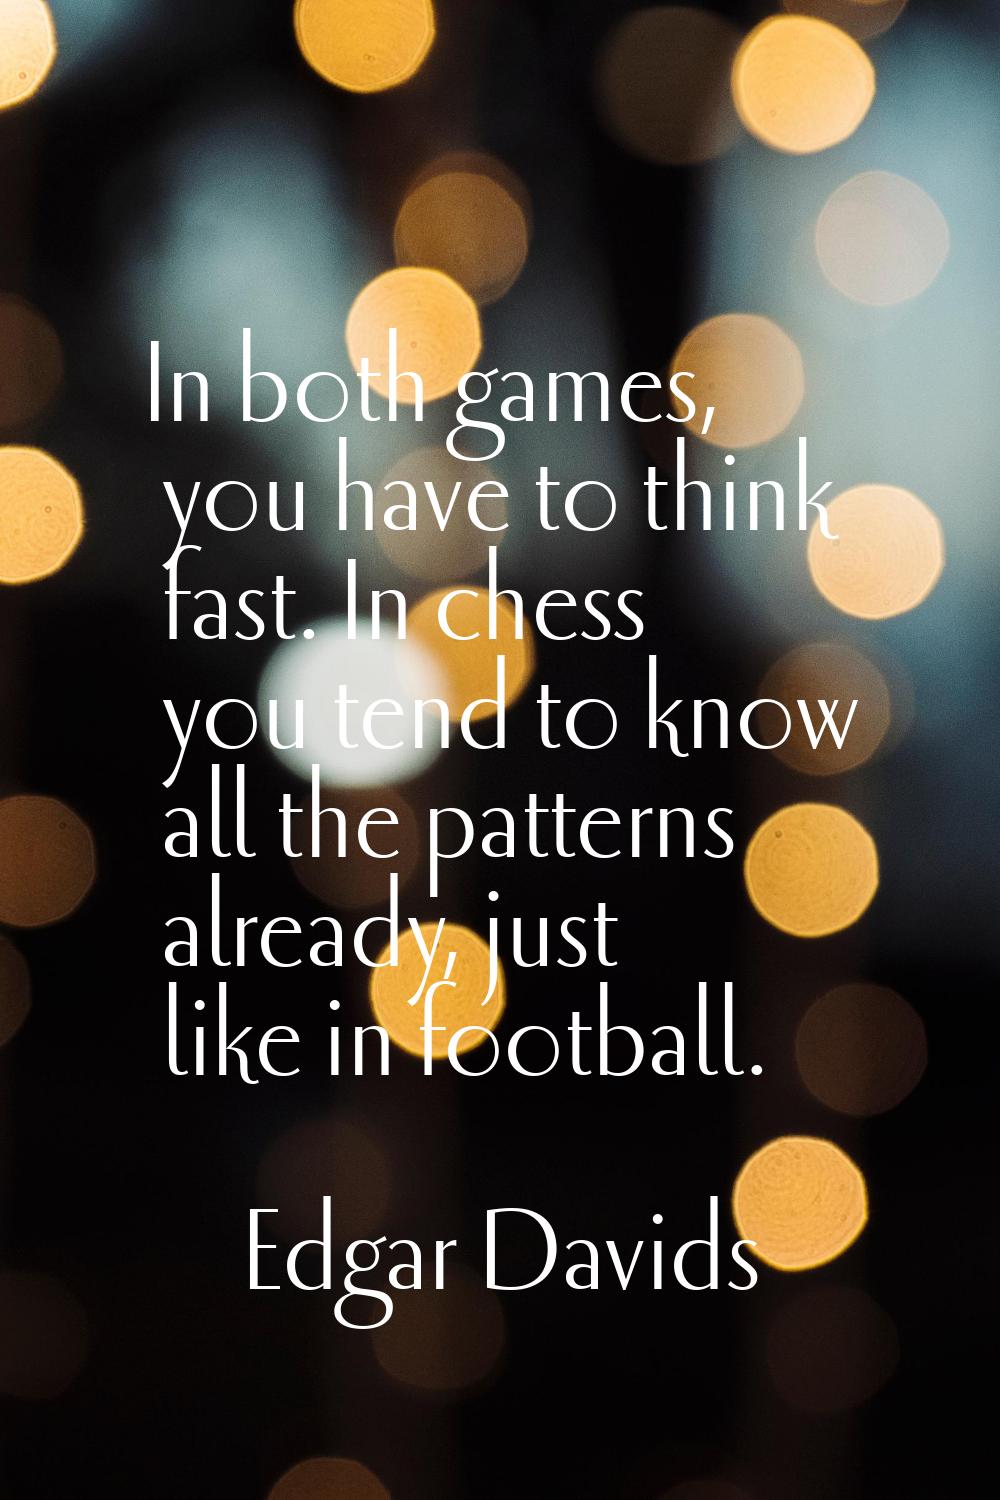 In both games, you have to think fast. In chess you tend to know all the patterns already, just lik